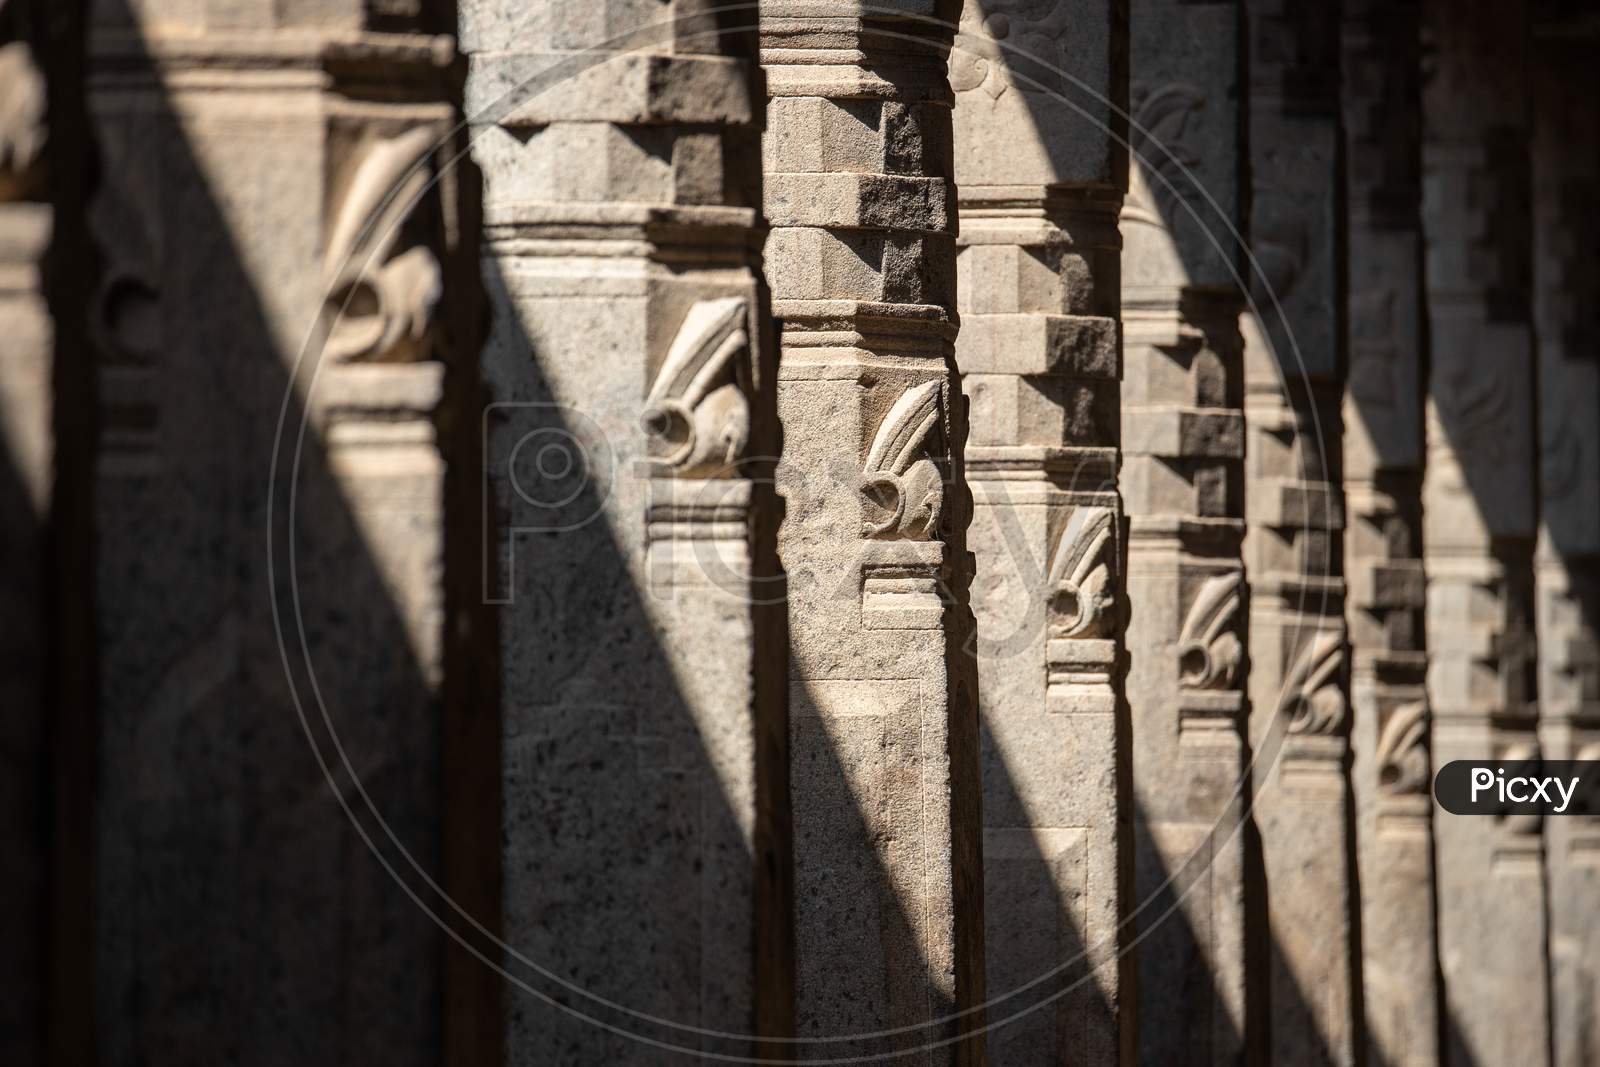 Stone Carved Pillars in An Ancient Hindu Temples